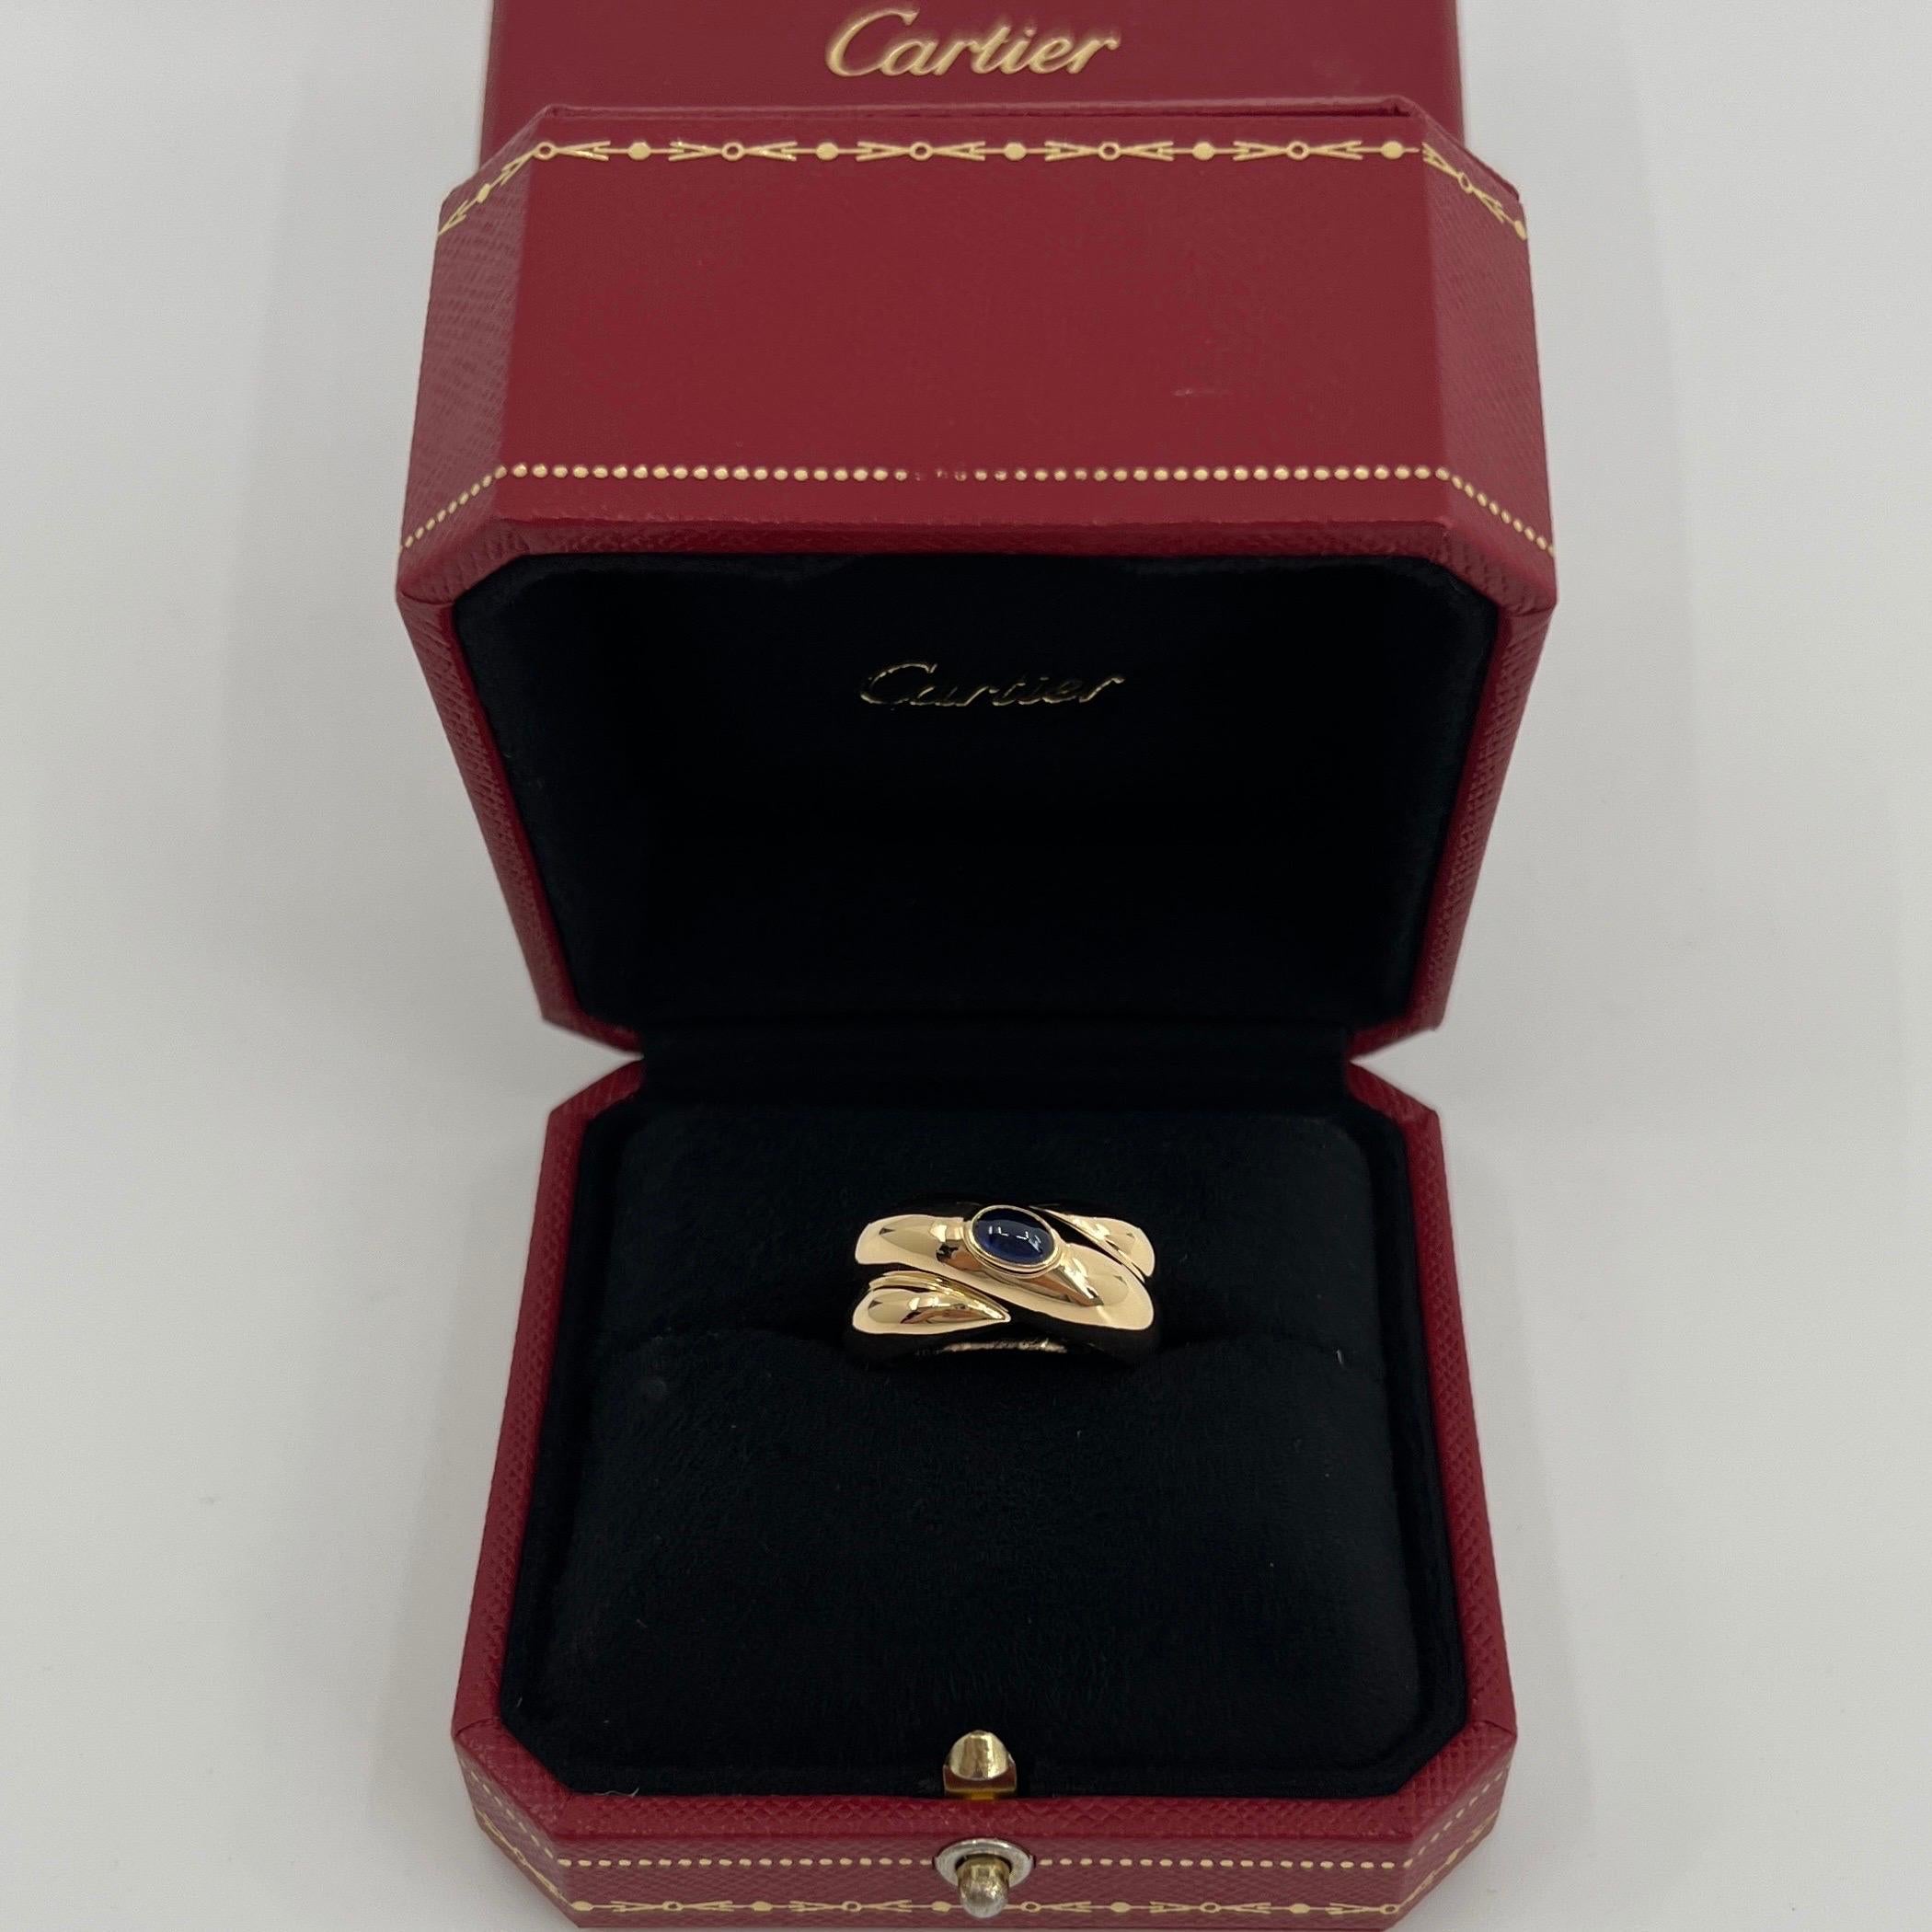 Vintage Cartier Deep Blue Sapphire 18k Yellow Gold Dome Ring.

Stunning yellow gold ring set with a fine deep blue oval cabochon sapphire. Fine jewellery houses like Cartier only use the finest of gemstones and this sapphire is no exception. A top